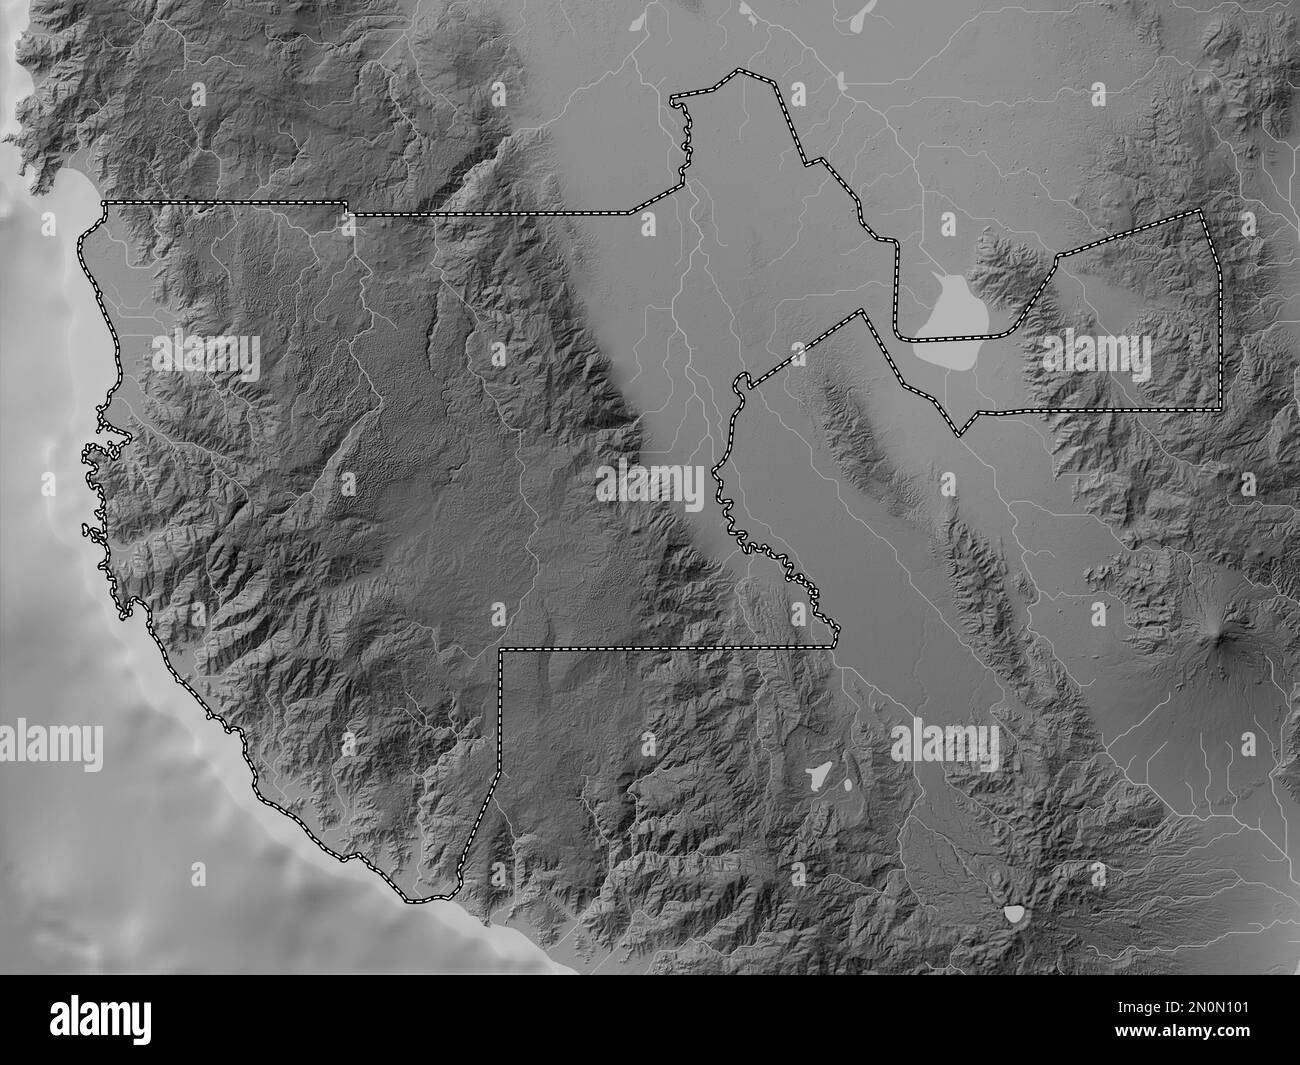 Sultan Kudarat, province of Philippines. Grayscale elevation map with lakes and rivers Stock Photo